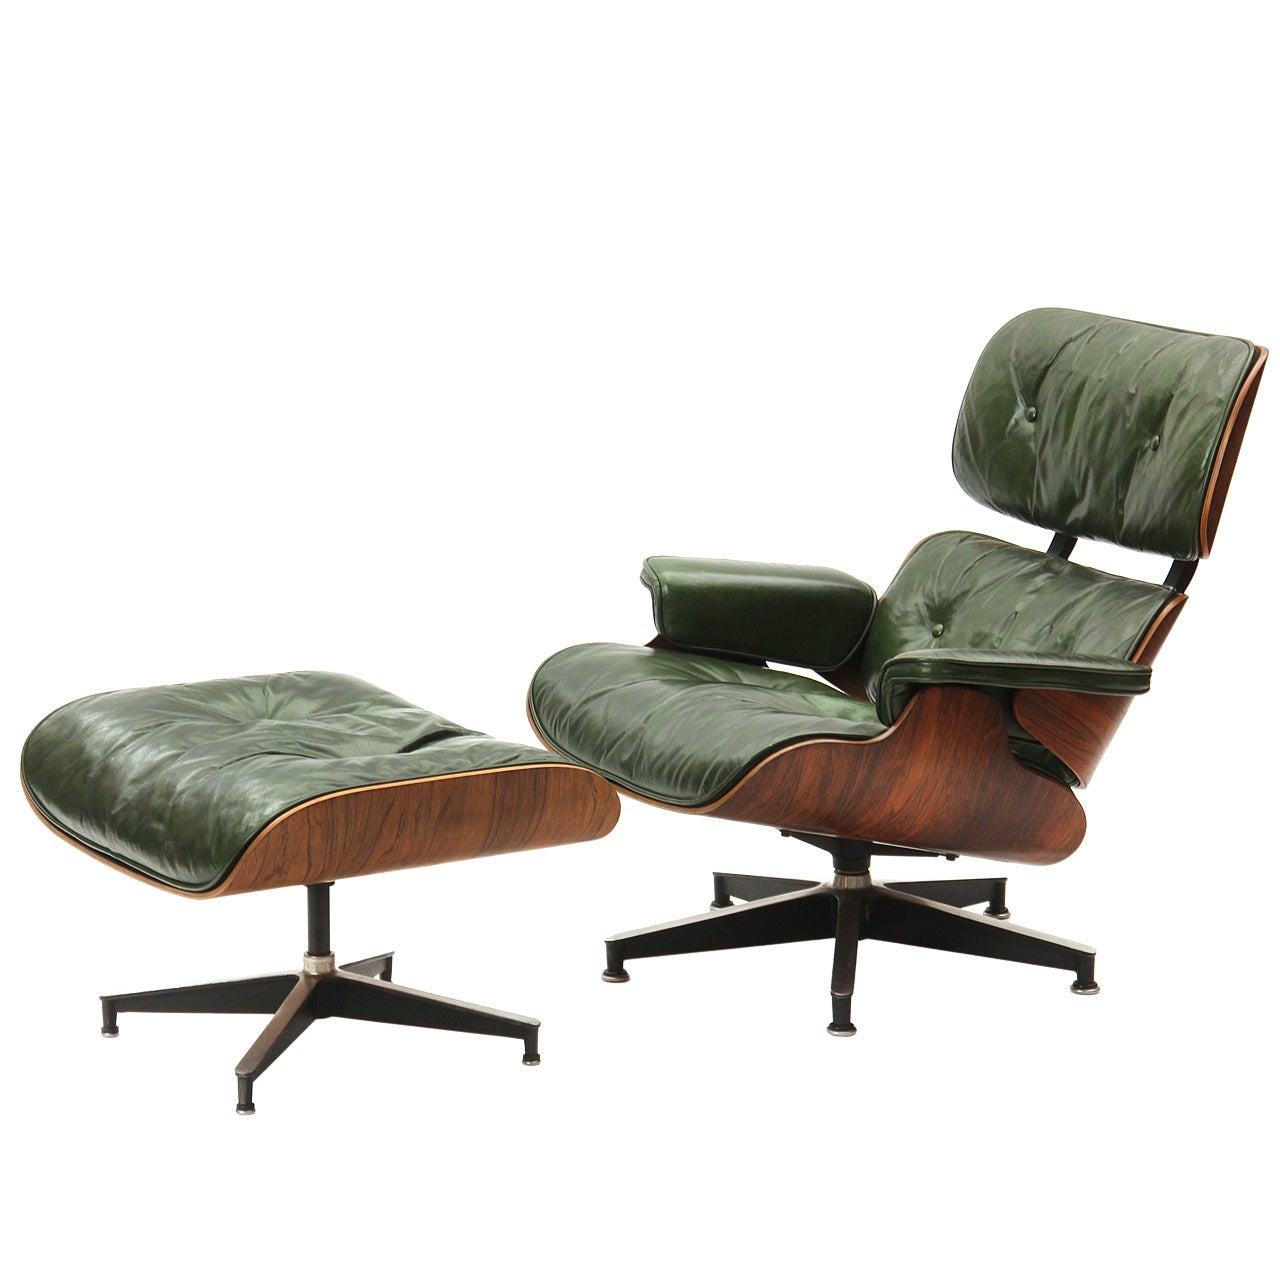 Green lounge by Charles and Ray Eames